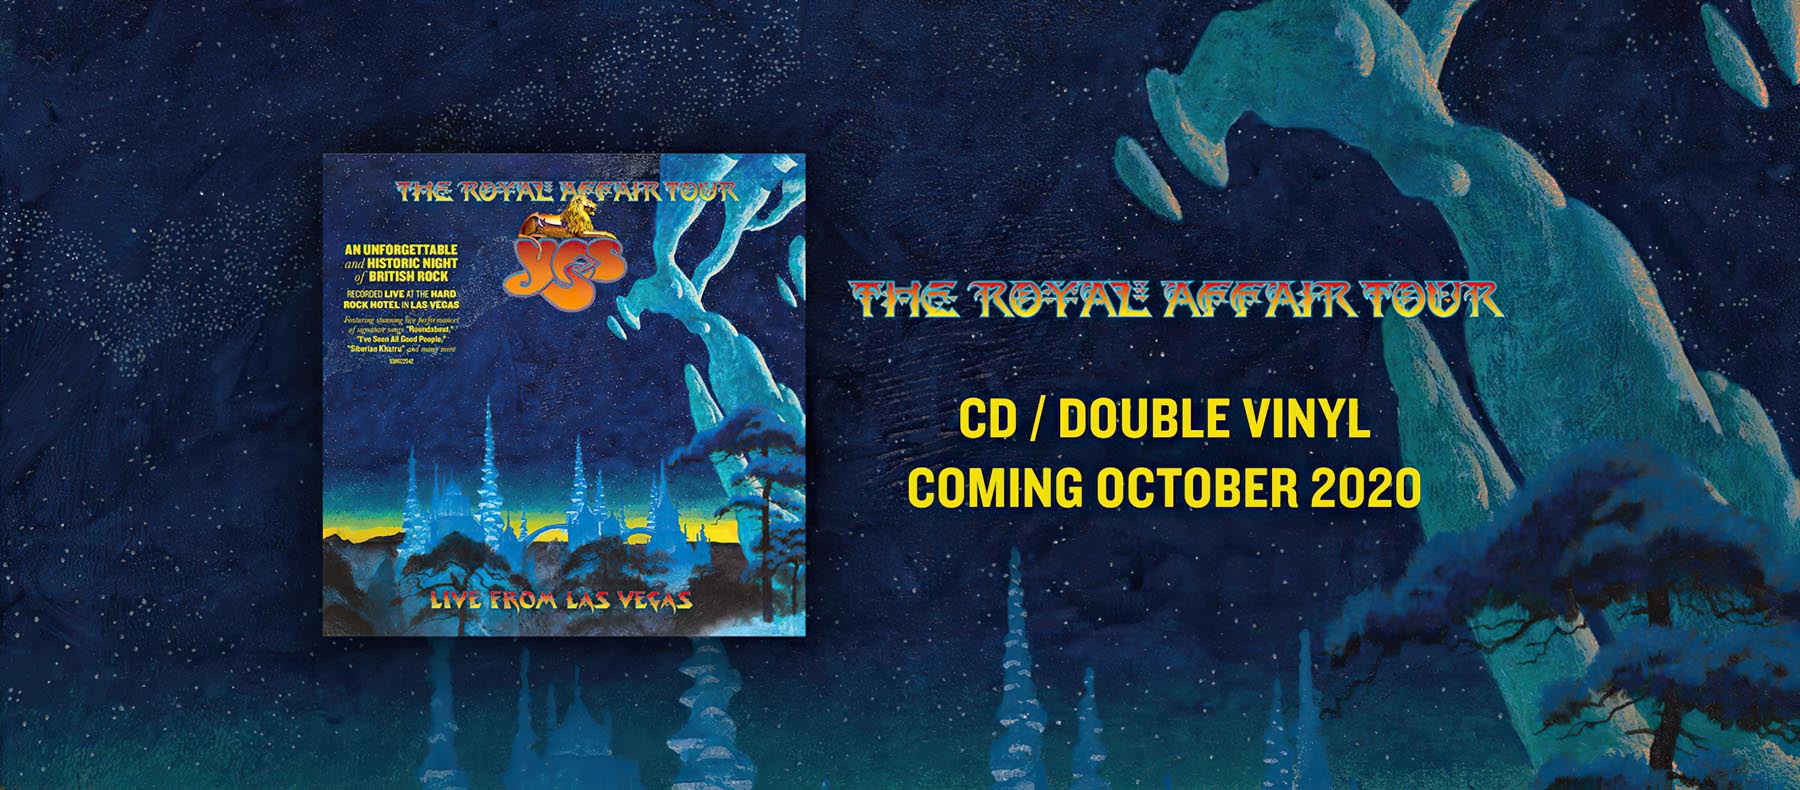 Yes To Release The Royal Affair Tour Live From Las Vegas On Cd And